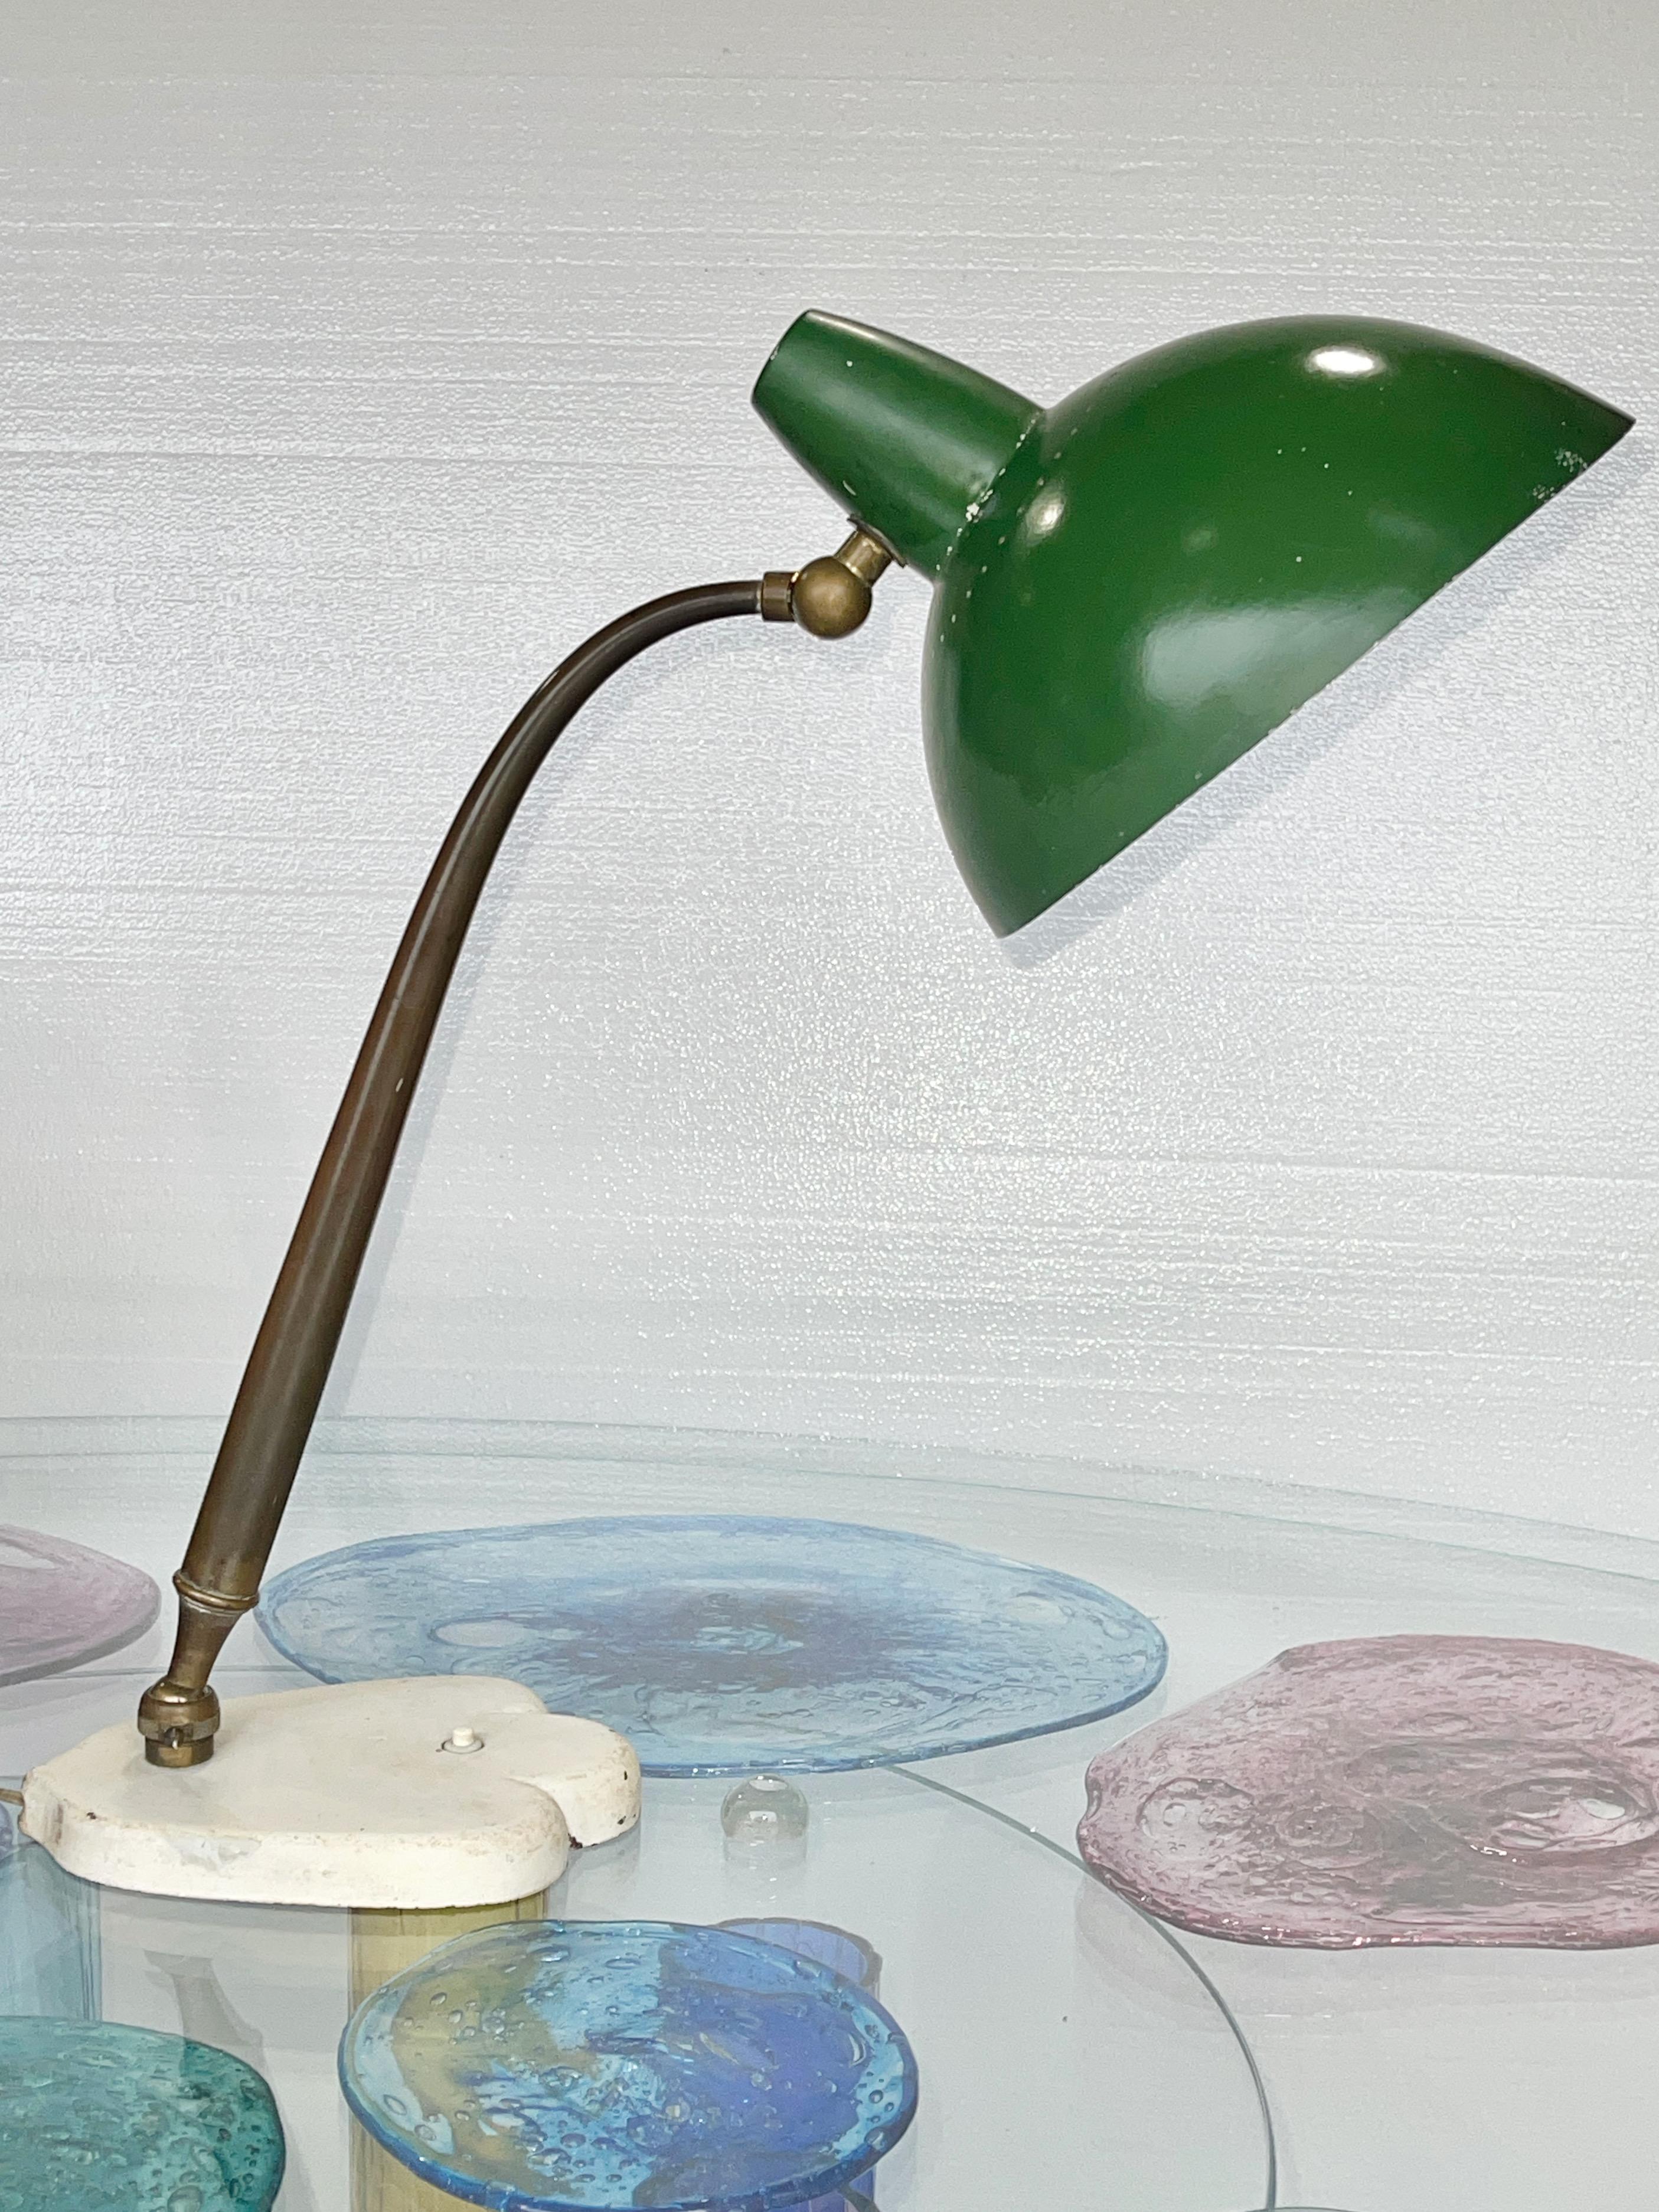 Rare multi-directional table lamp by Lumen Milano, probably designed by Oscar Torlasco, mid-1940's.
Gloriously engineered elongated tapered brass stem stretches from a knurled ball joint fitted to a most unusual cast iron paw foot shaped base with